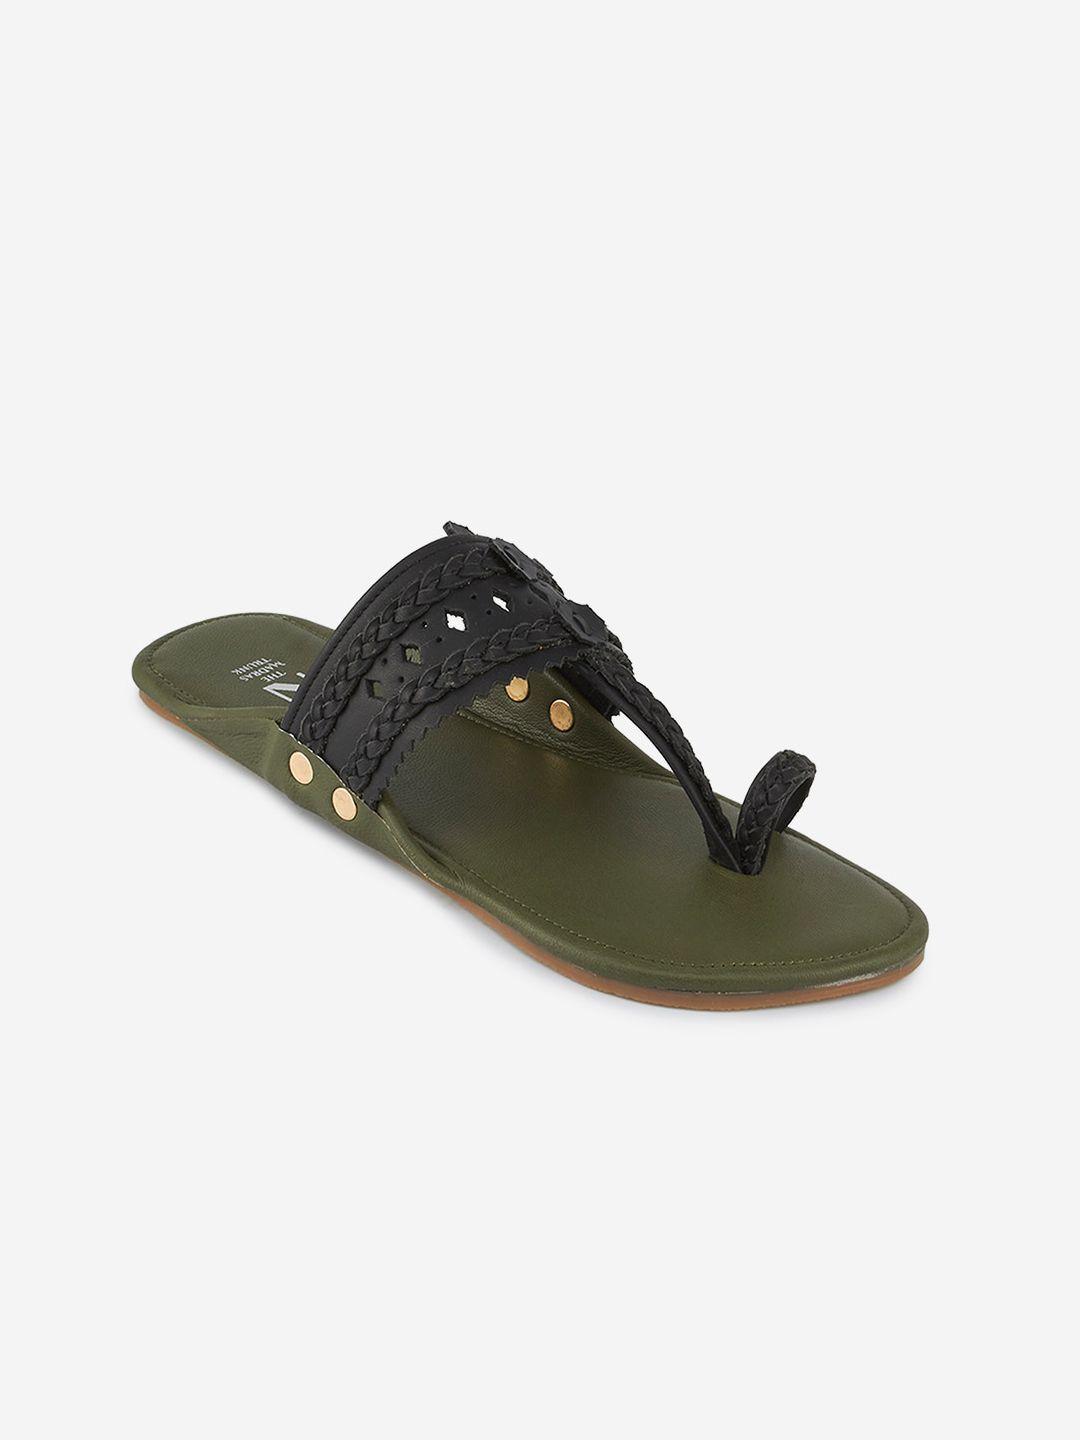 the madras trunk women olive green one toe flats with laser cuts